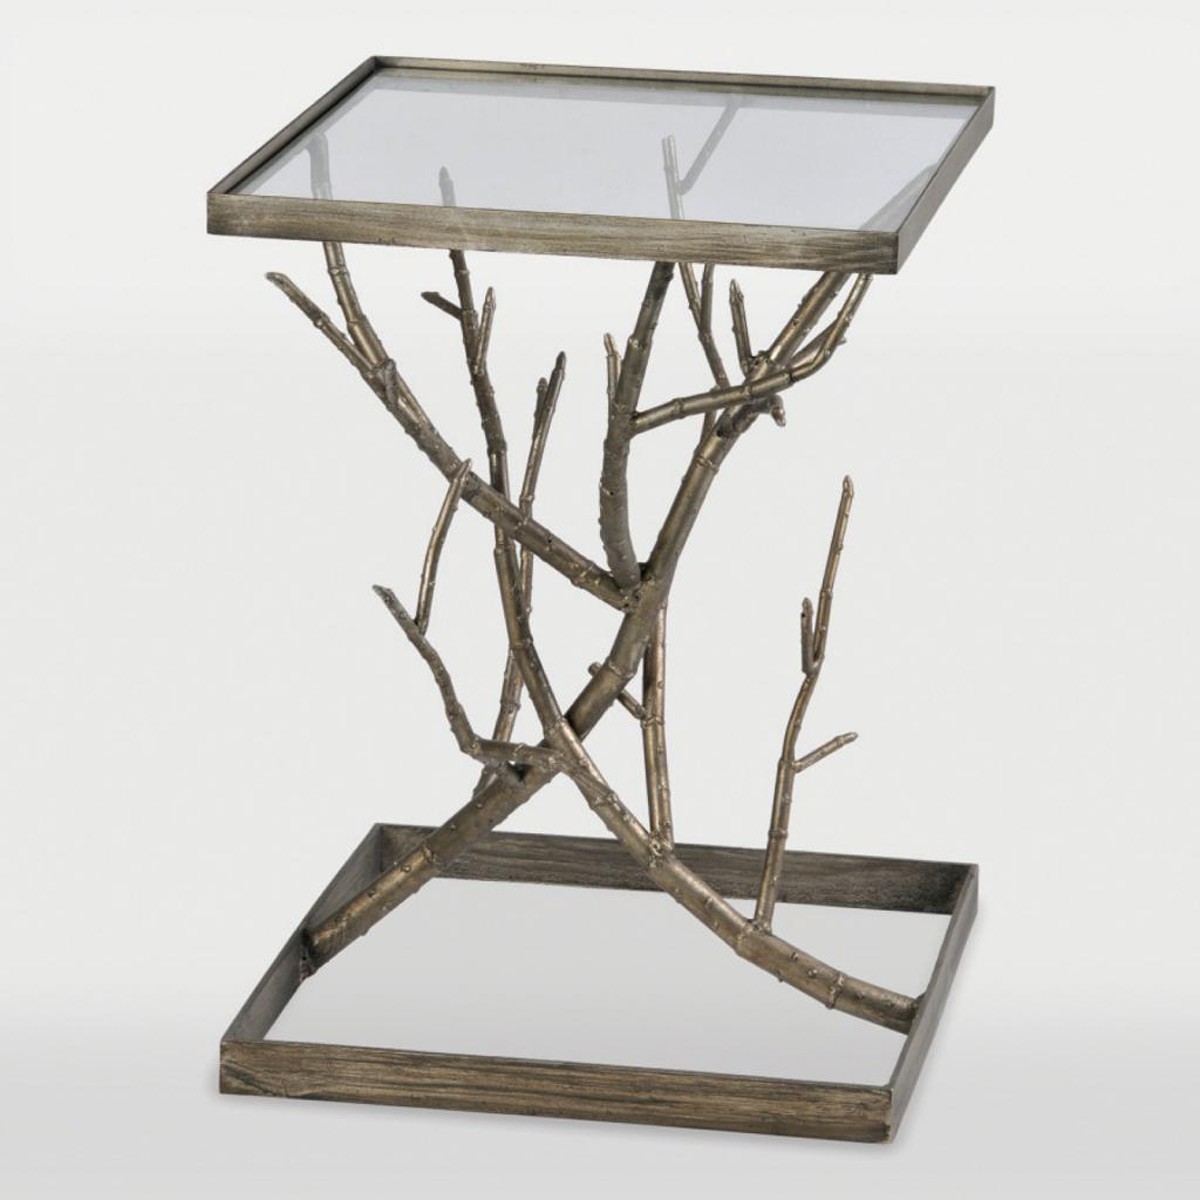 Ren-Wil Synthesis Accent table - Antique silver